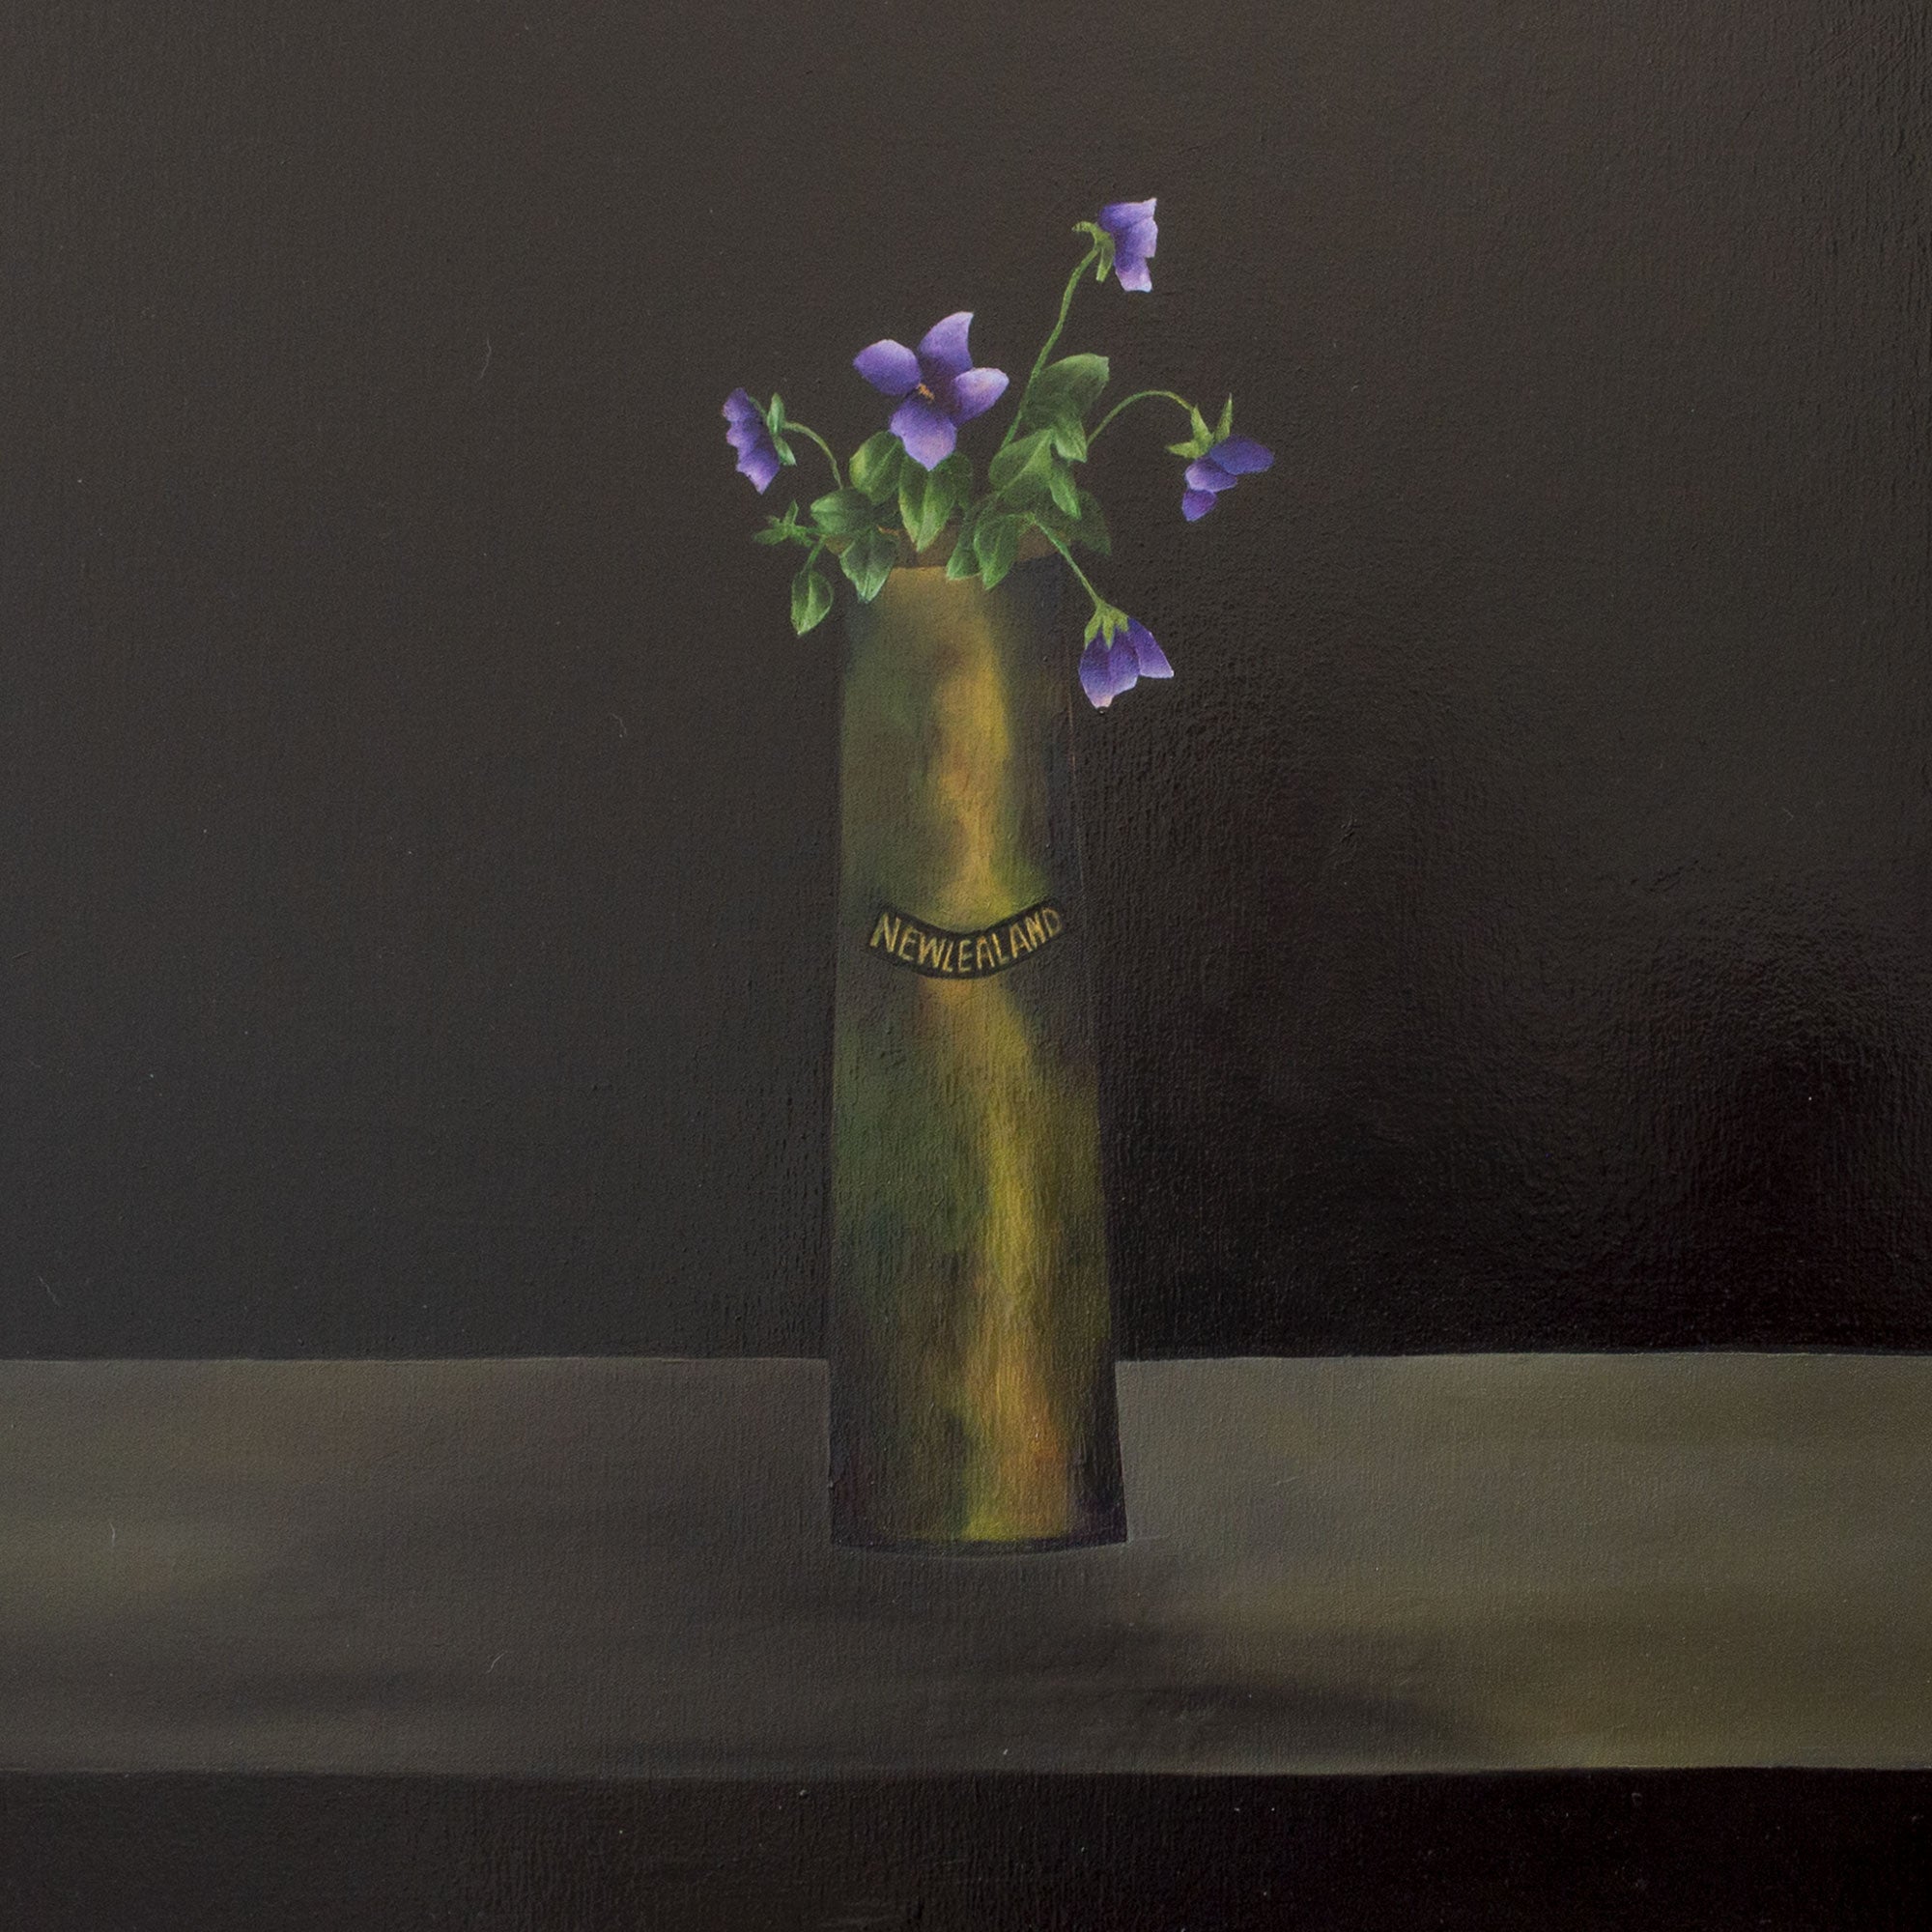 Artillery Shell Vase with Violets